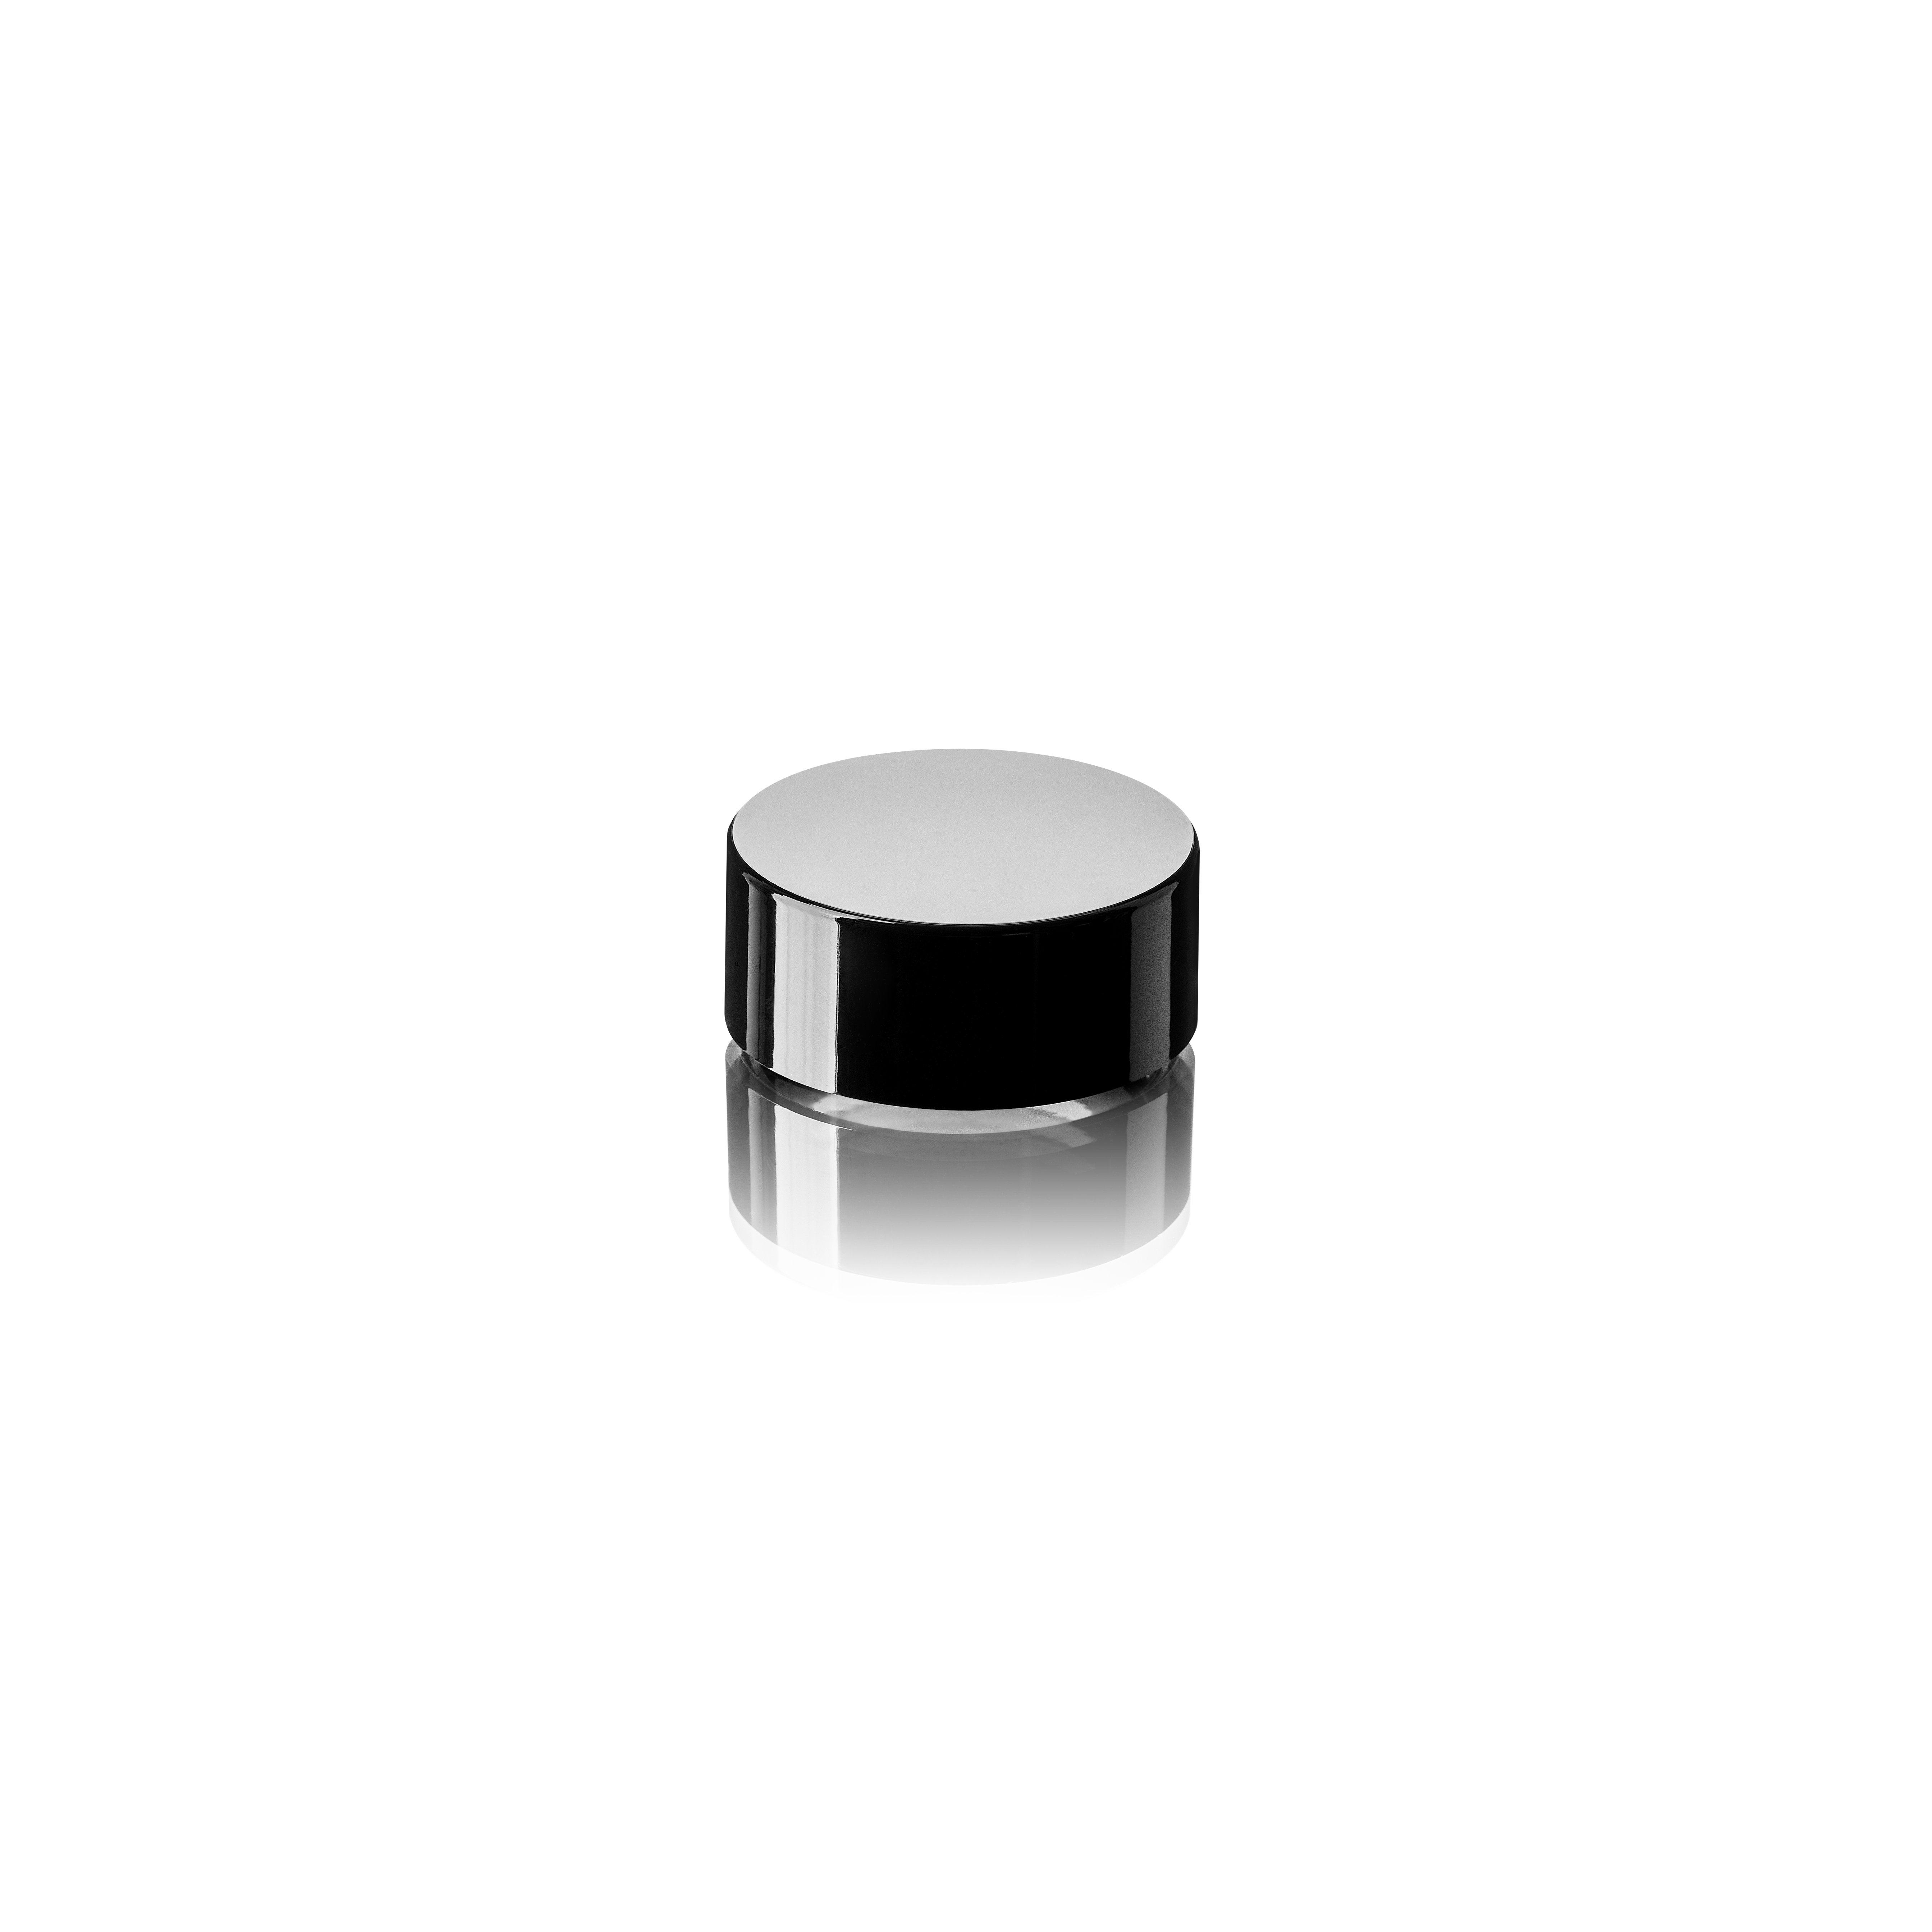 Child-resistant lid Modern 28 special, PP, black, glossy finish, white inlay (Camellia 5)